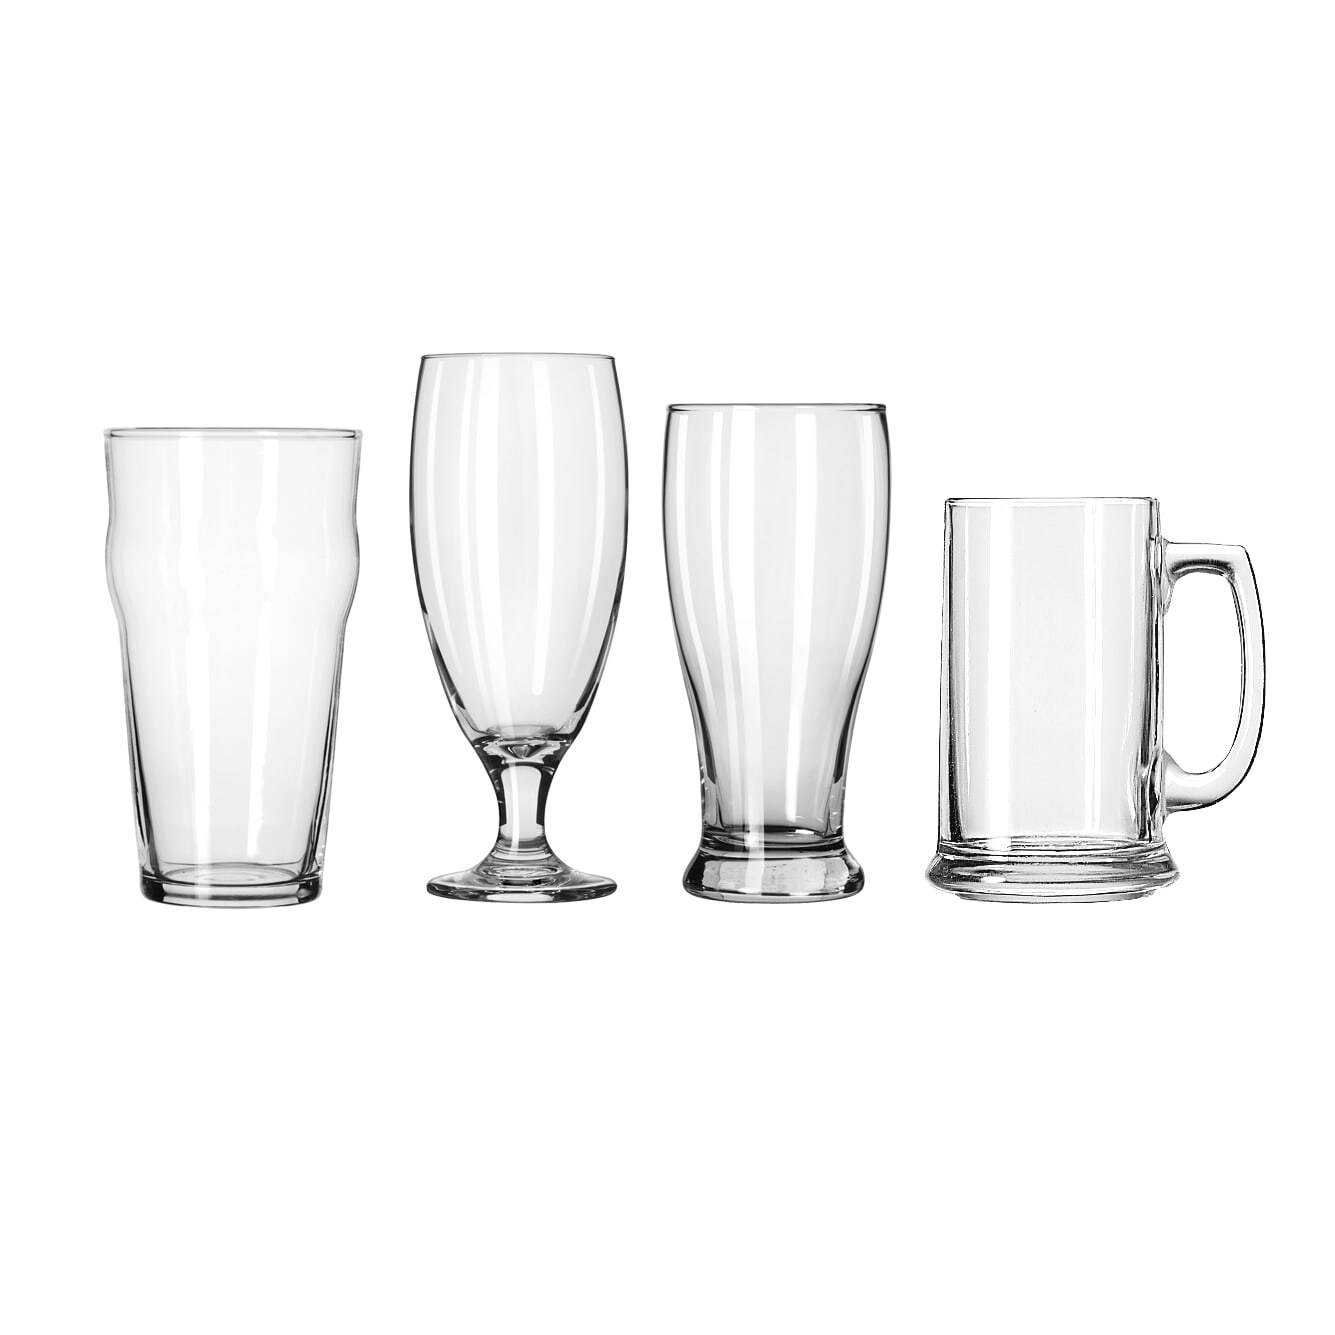 https://ak1.ostkcdn.com/images/products/is/images/direct/6f7c9ace3d358a8e4f65eab80945297741e39e18/Libbey-Craft-Brews-Assorted-Beer-Glasses%2C-Set-of-4.jpg